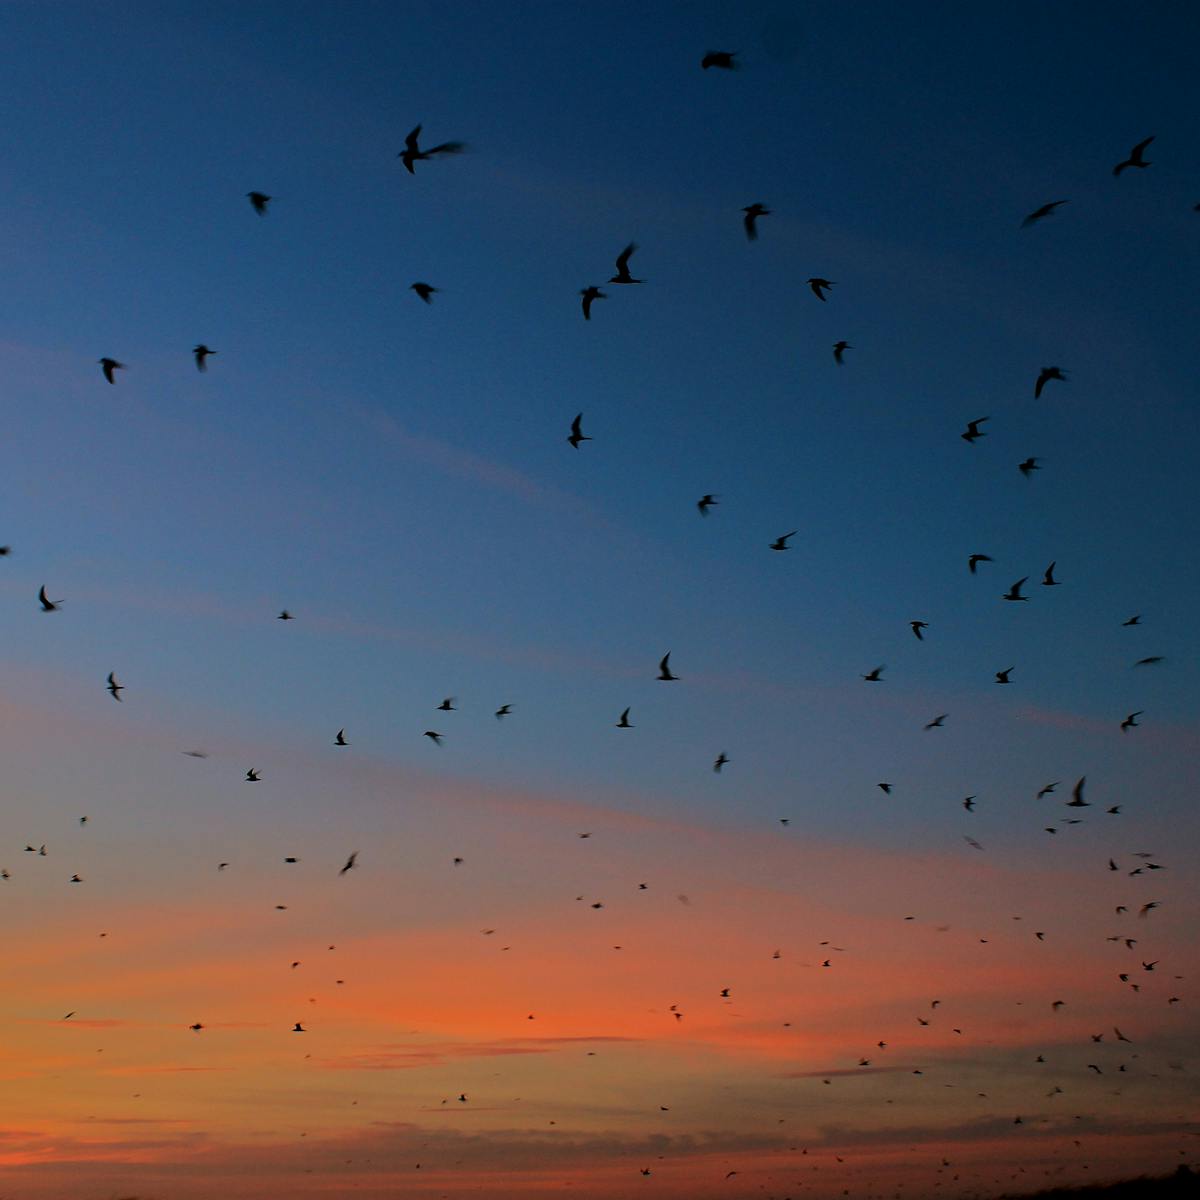 Beyond borders: Why we need global action to protect migratory birds